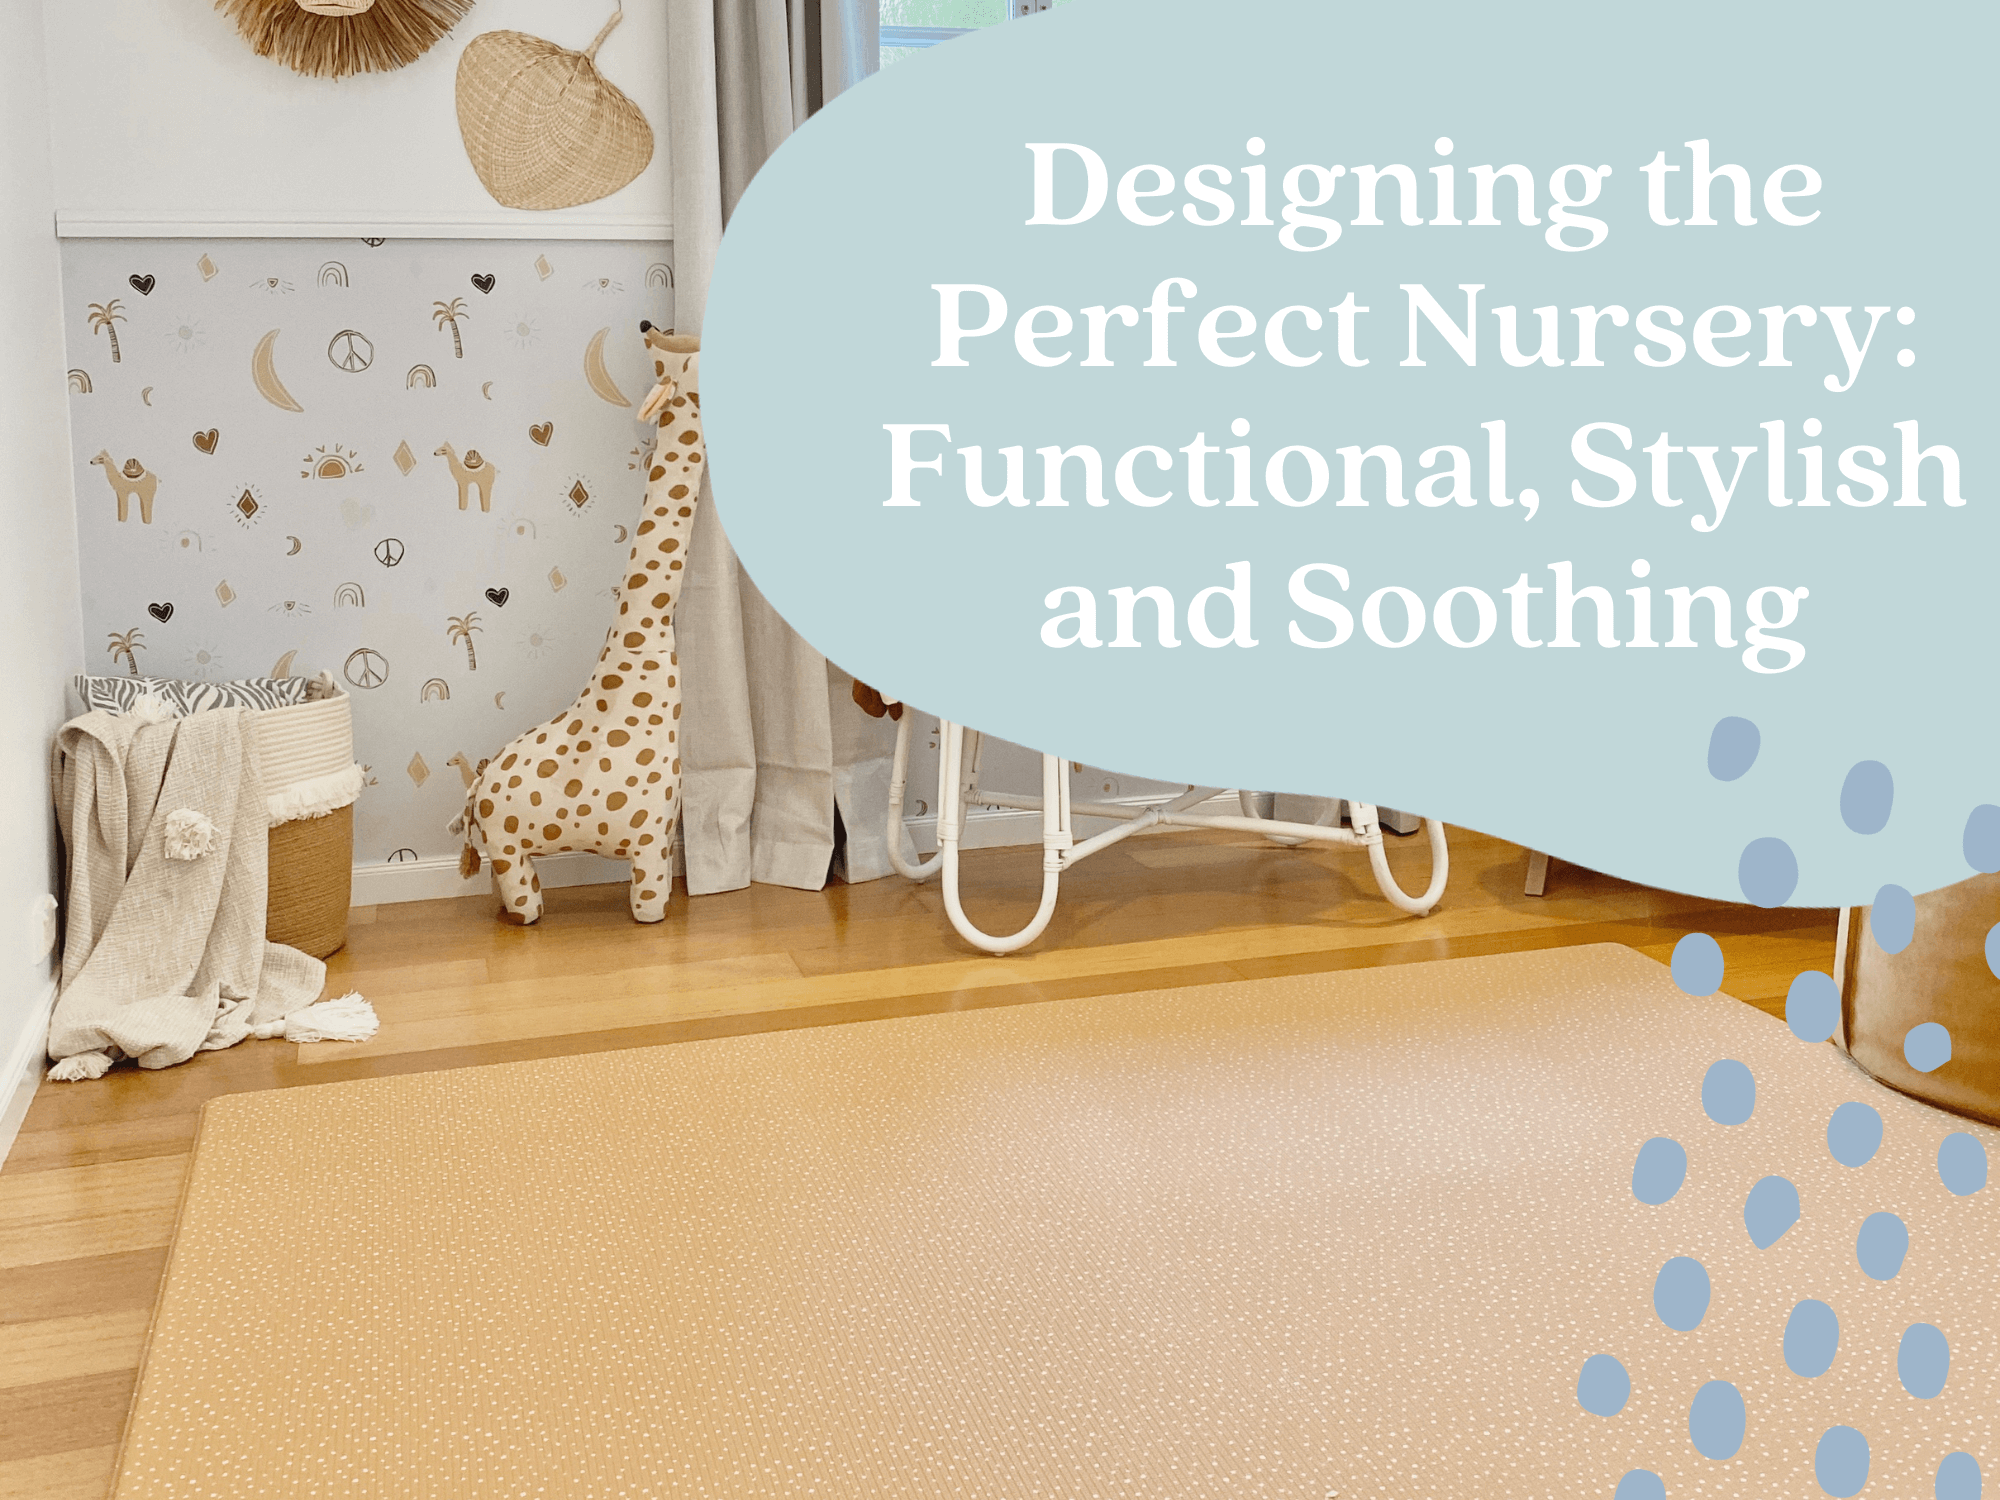 Designing the Perfect Nursery: Functional, Stylish and Soothing